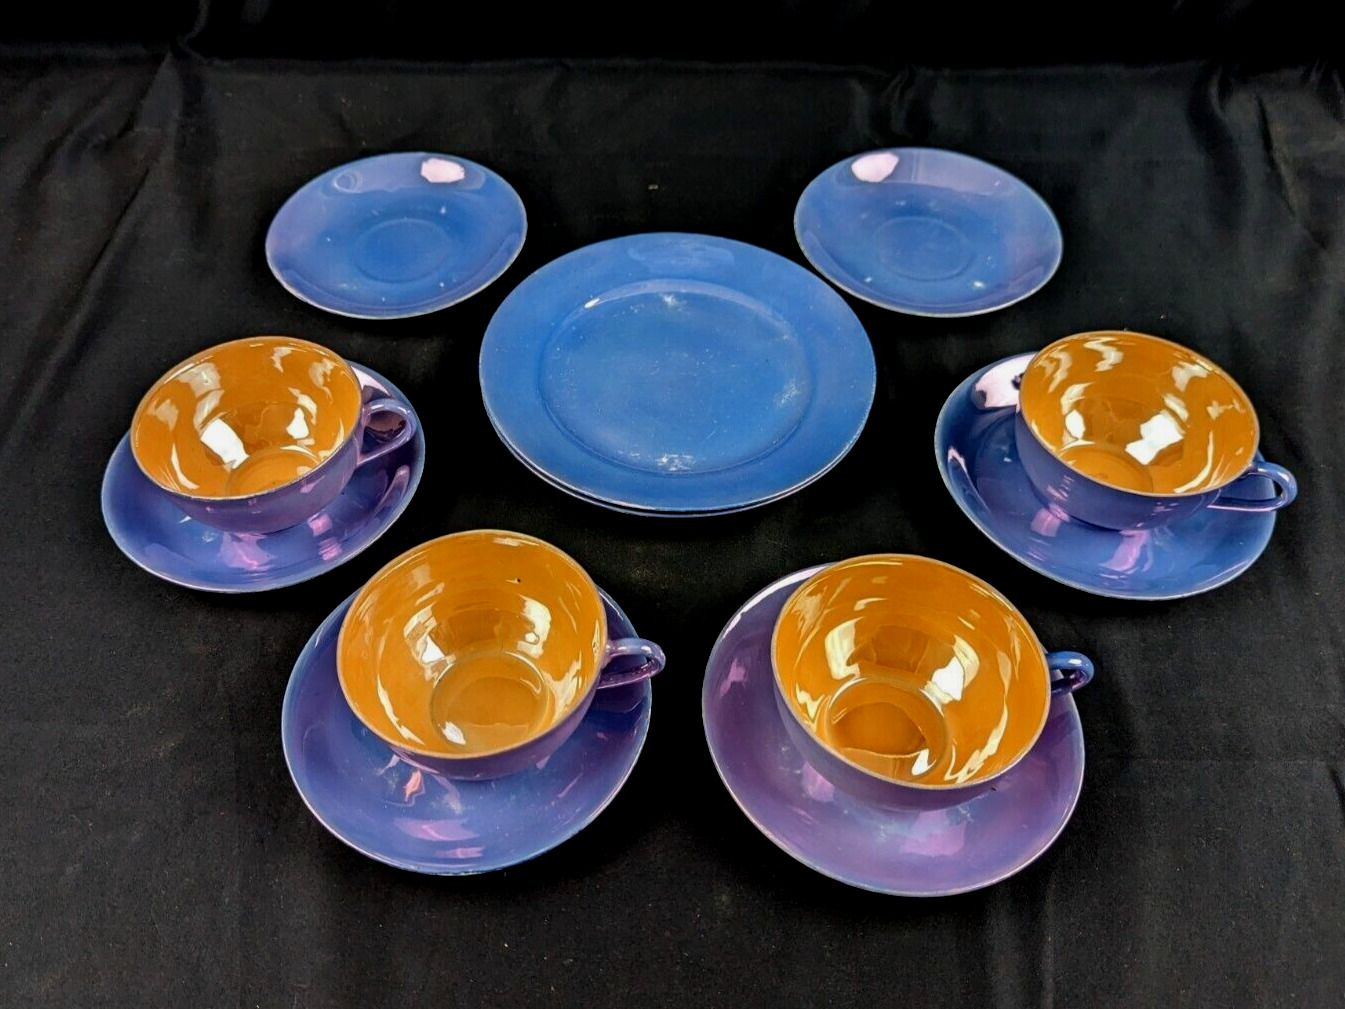 Vintage Japanese Lusterware, 12pc Set, Hand Painted Peach and Blue